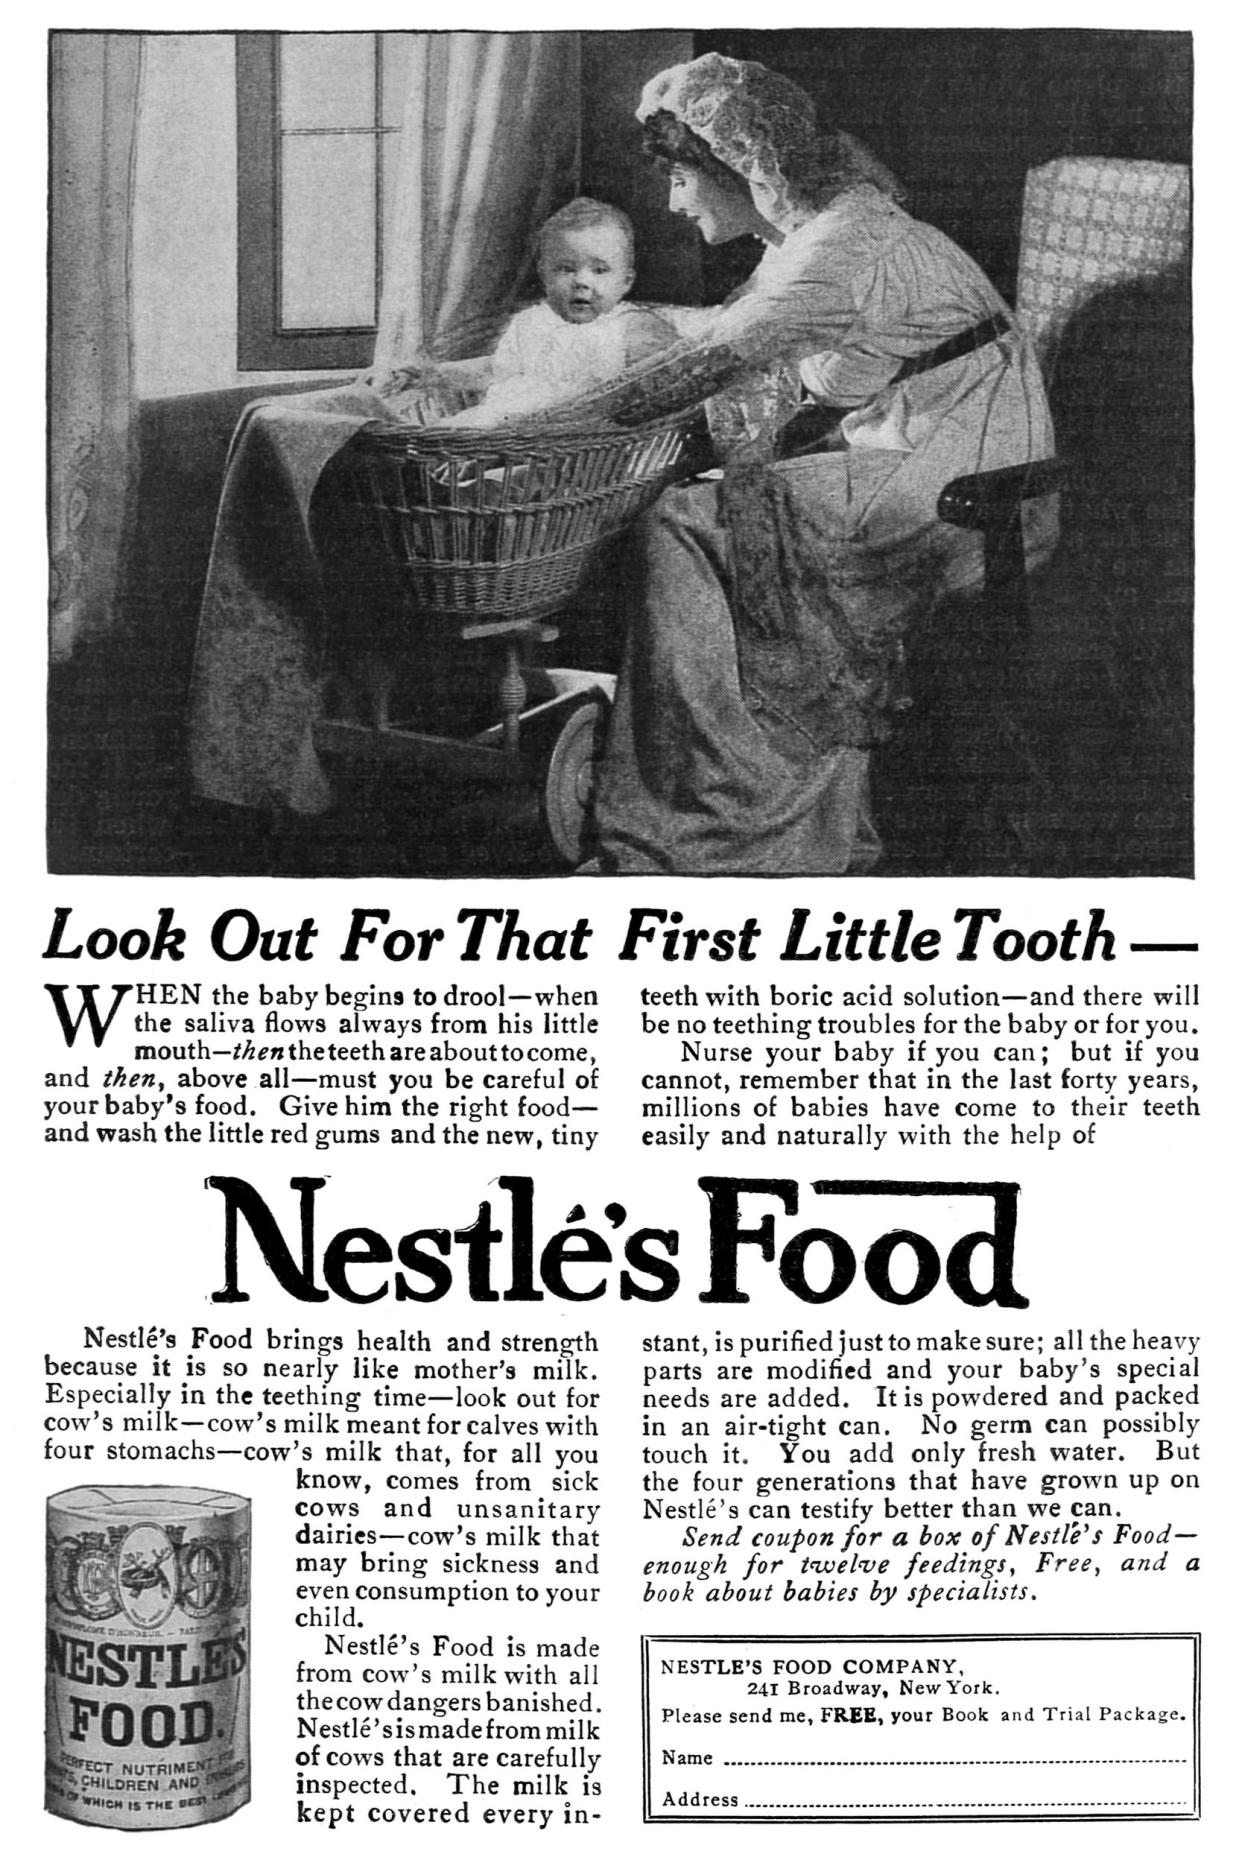 A 1915 advertisement for "Nestlés Food", an early infant formula